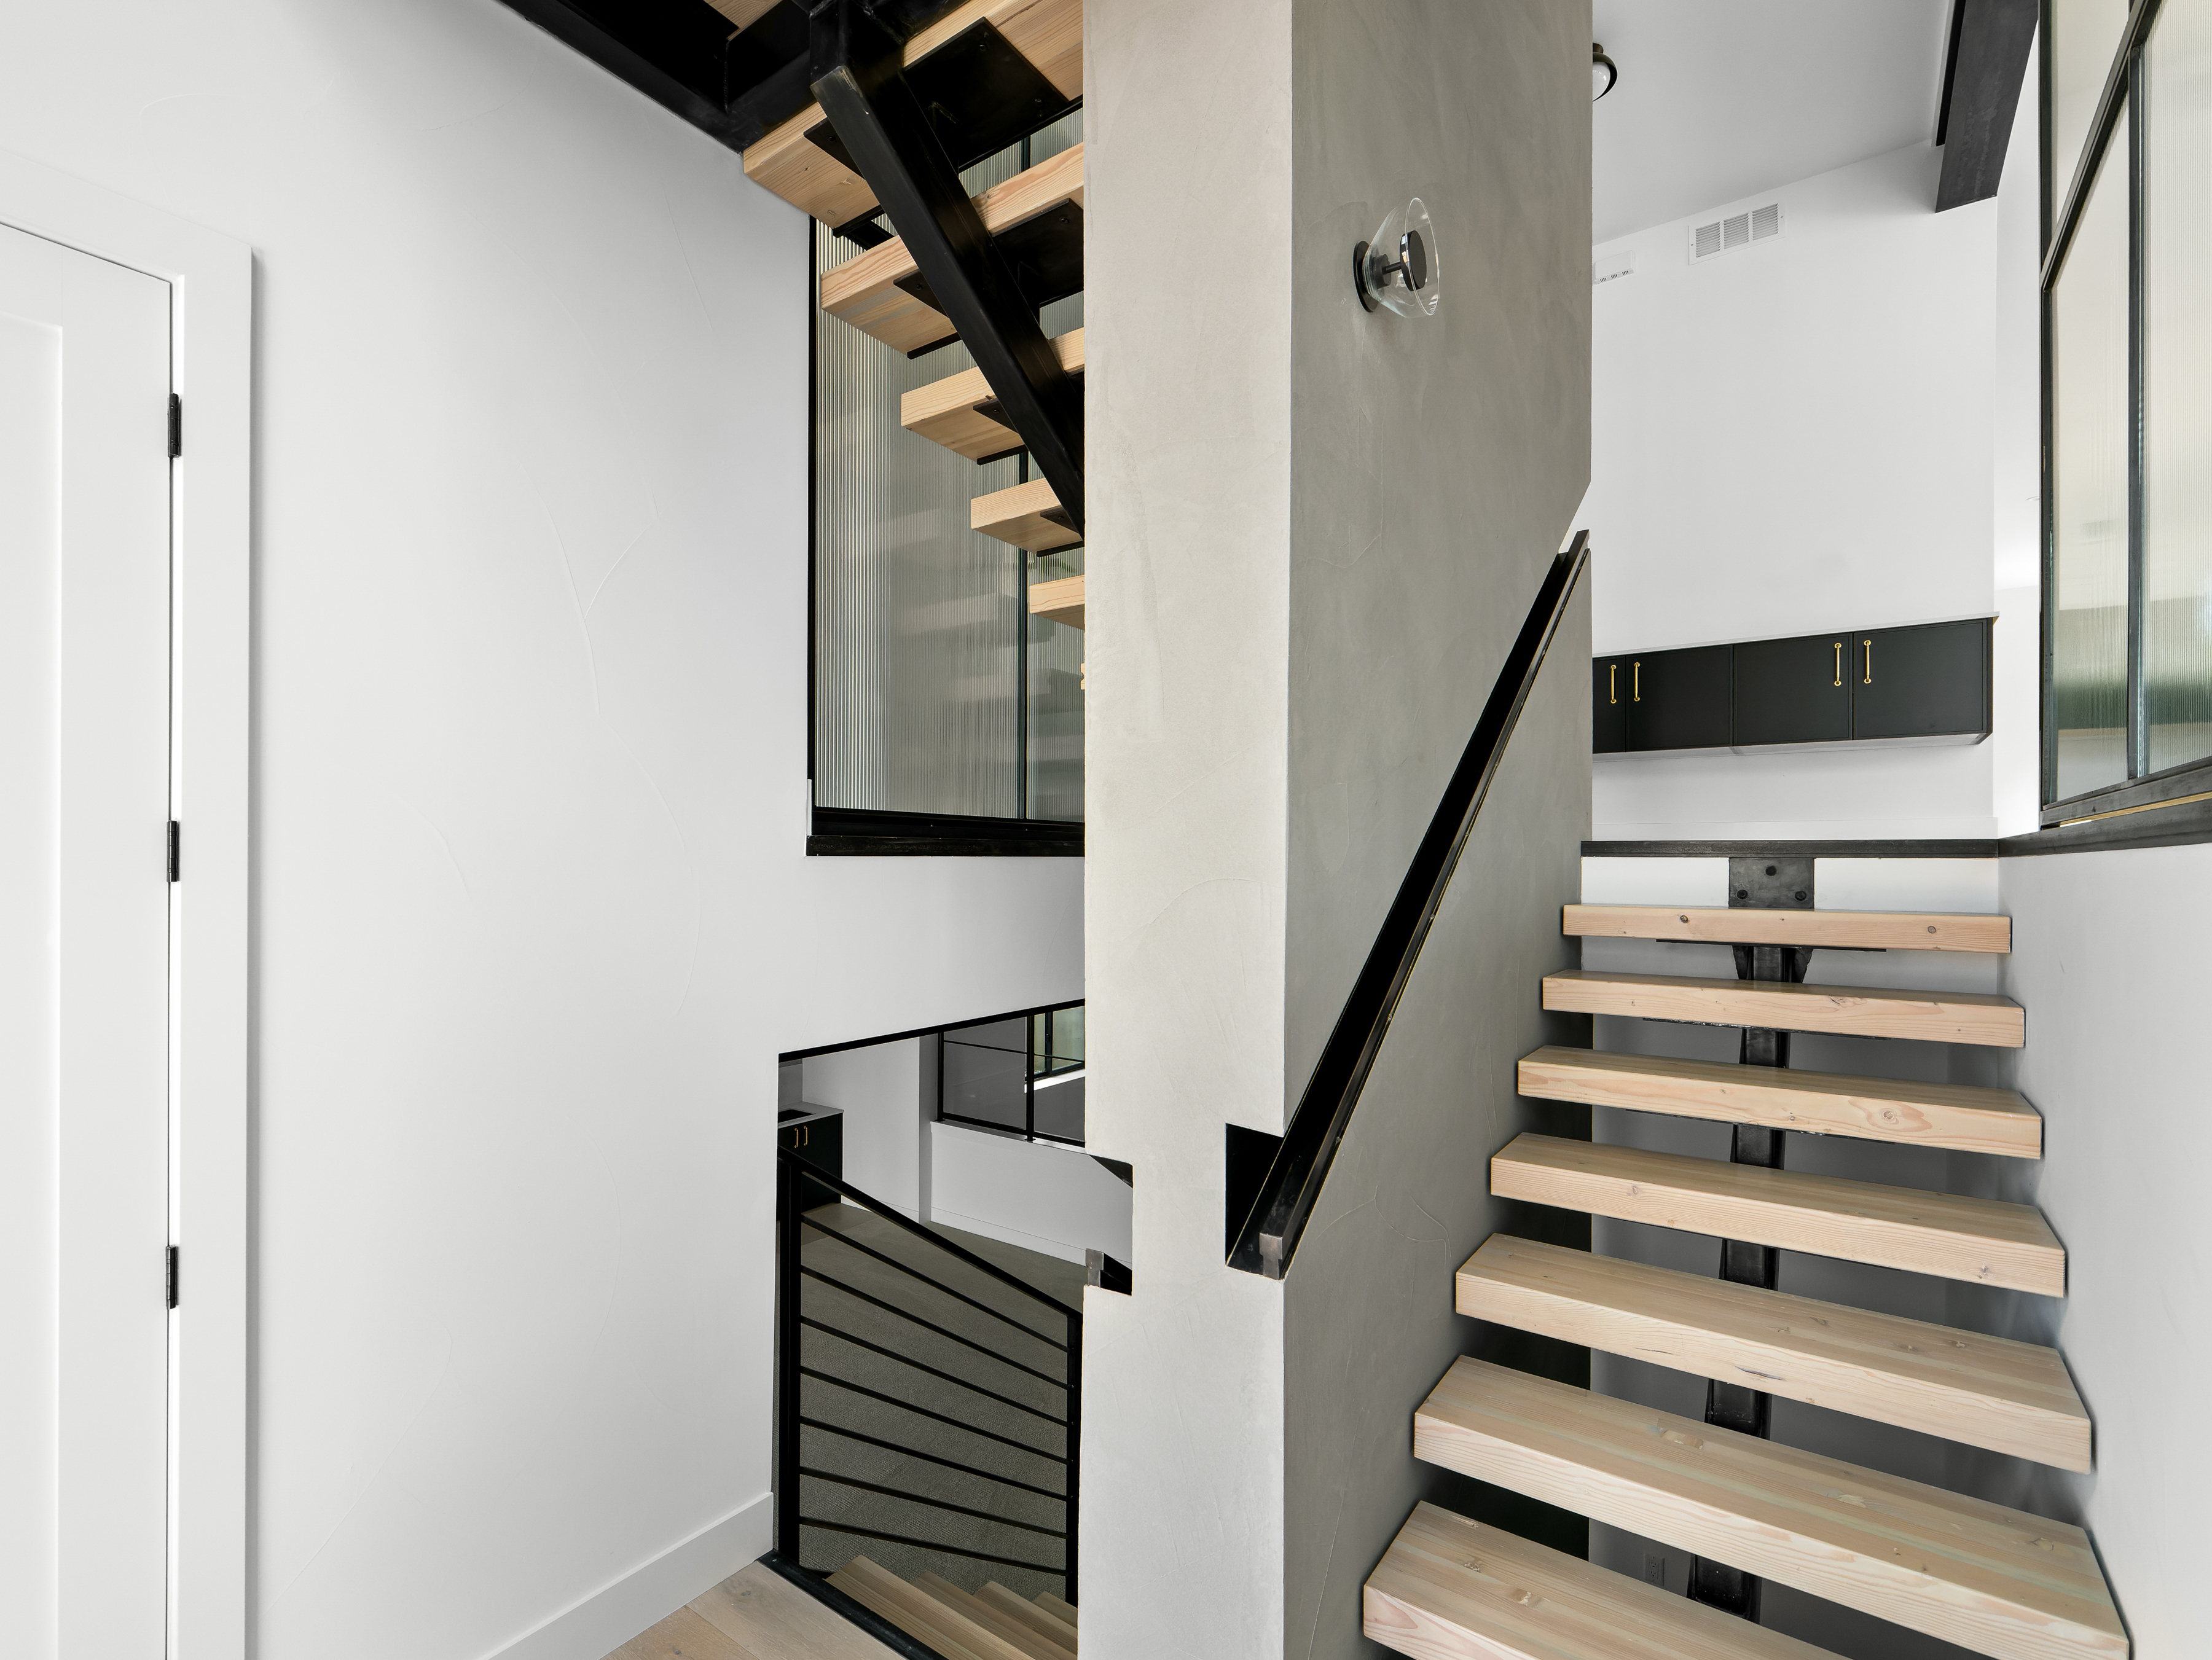 Beautiful wood and steel accented stair well and landing by Work Shop Colorado